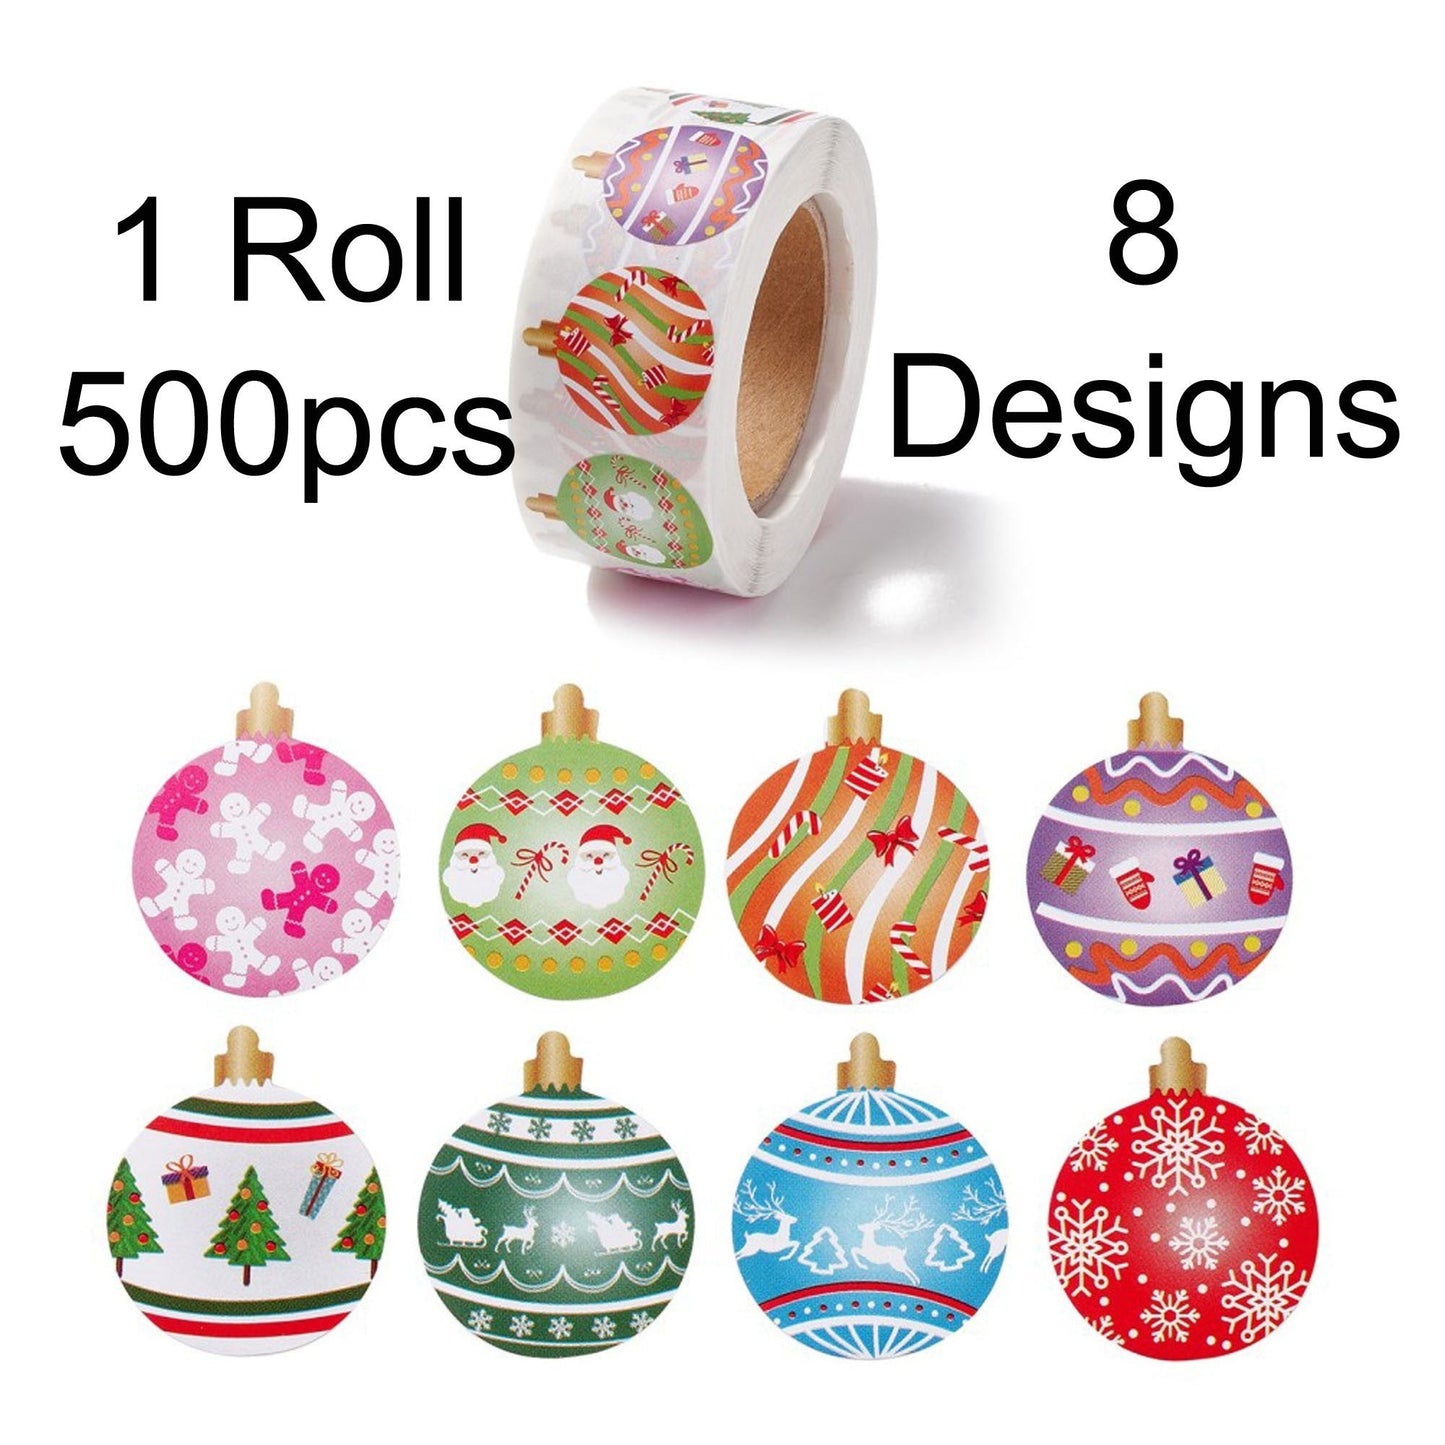 1 Roll 500pcs Christmas Bauble Festive Round Self Adhesive Paper Stickers 25mm